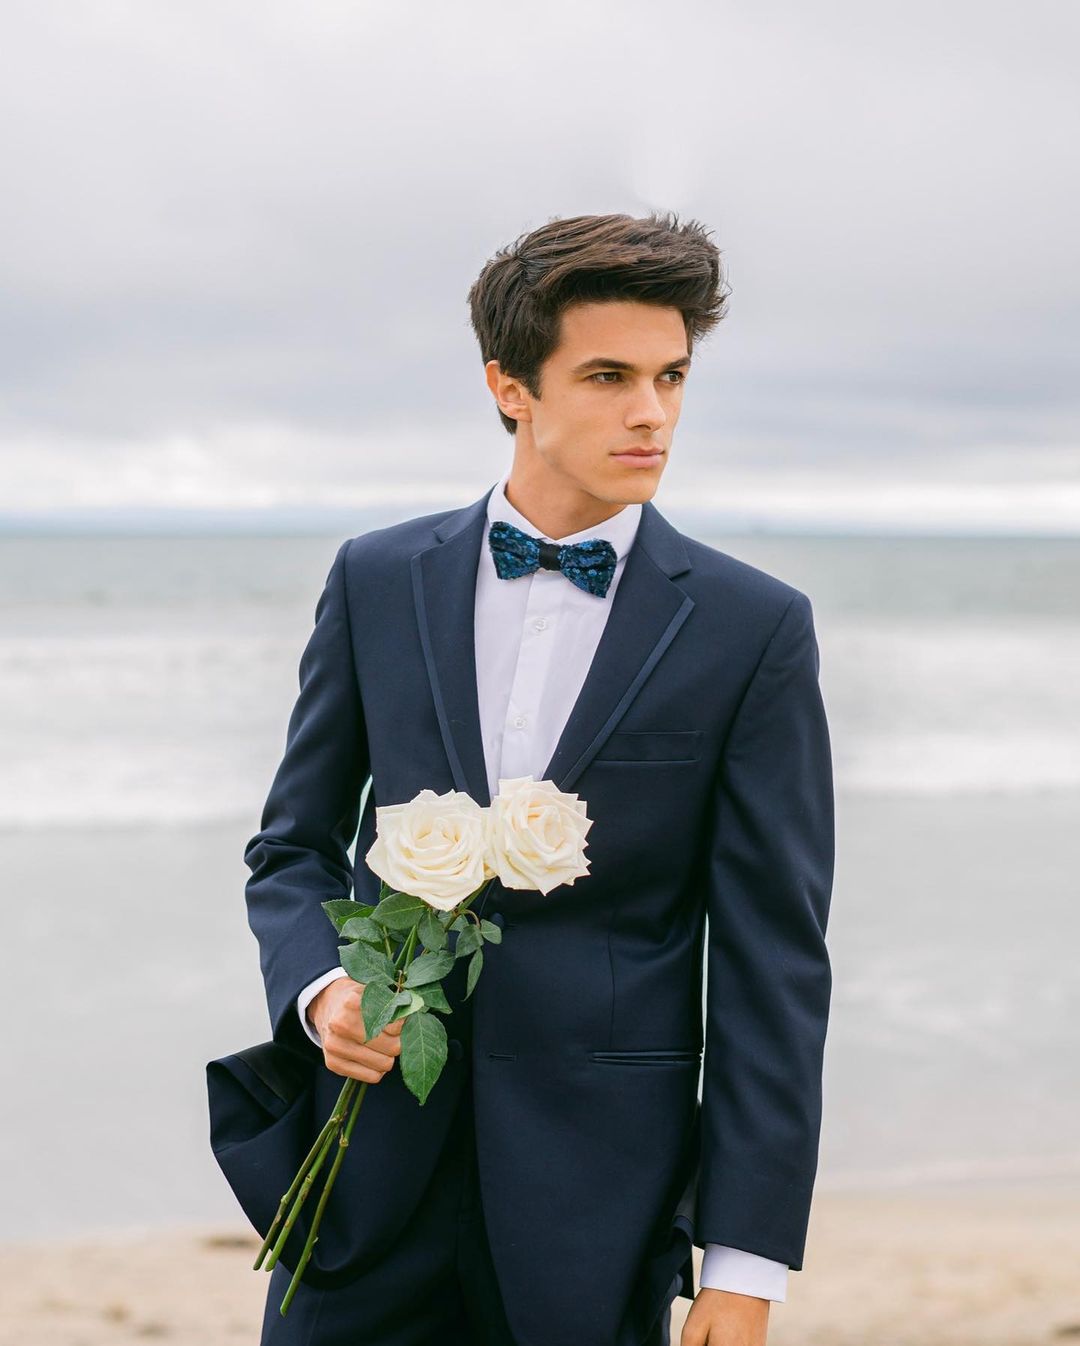 Brent Rivera - Biography, Profile, Facts, and Career